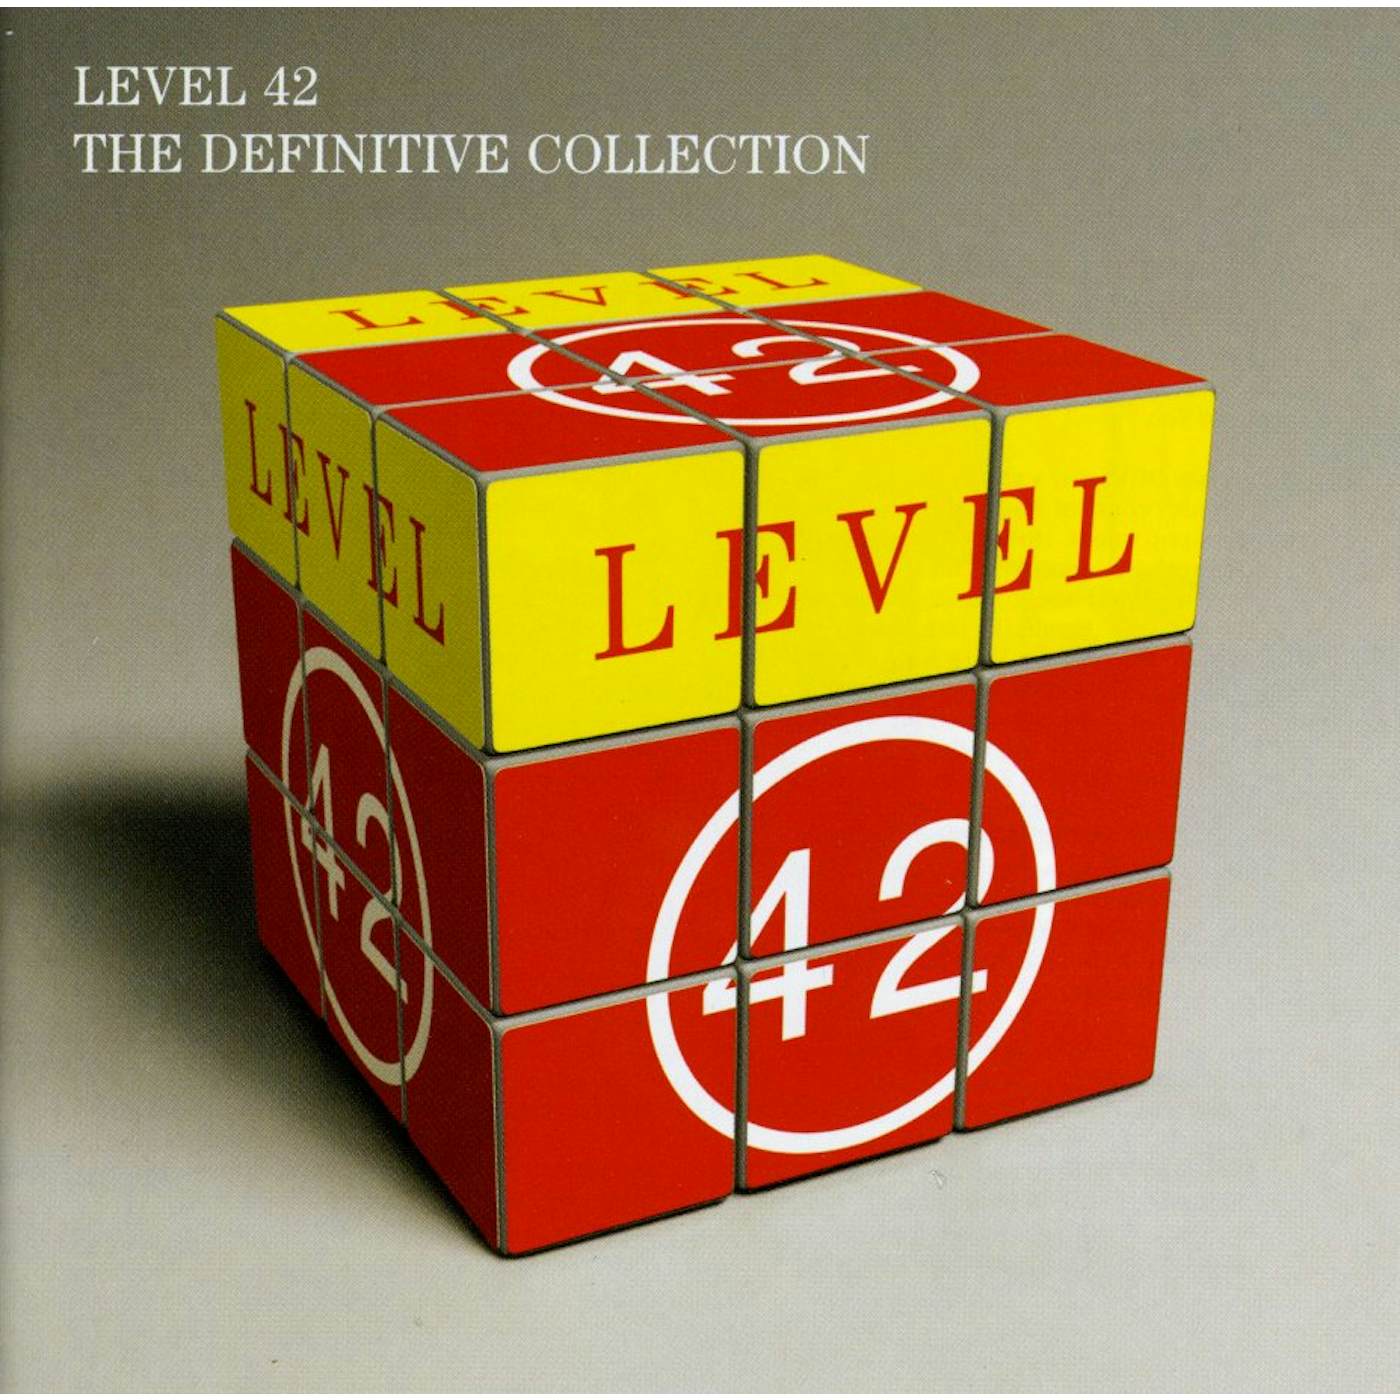 Level 42 DEFINITIVE COLLECTION CD